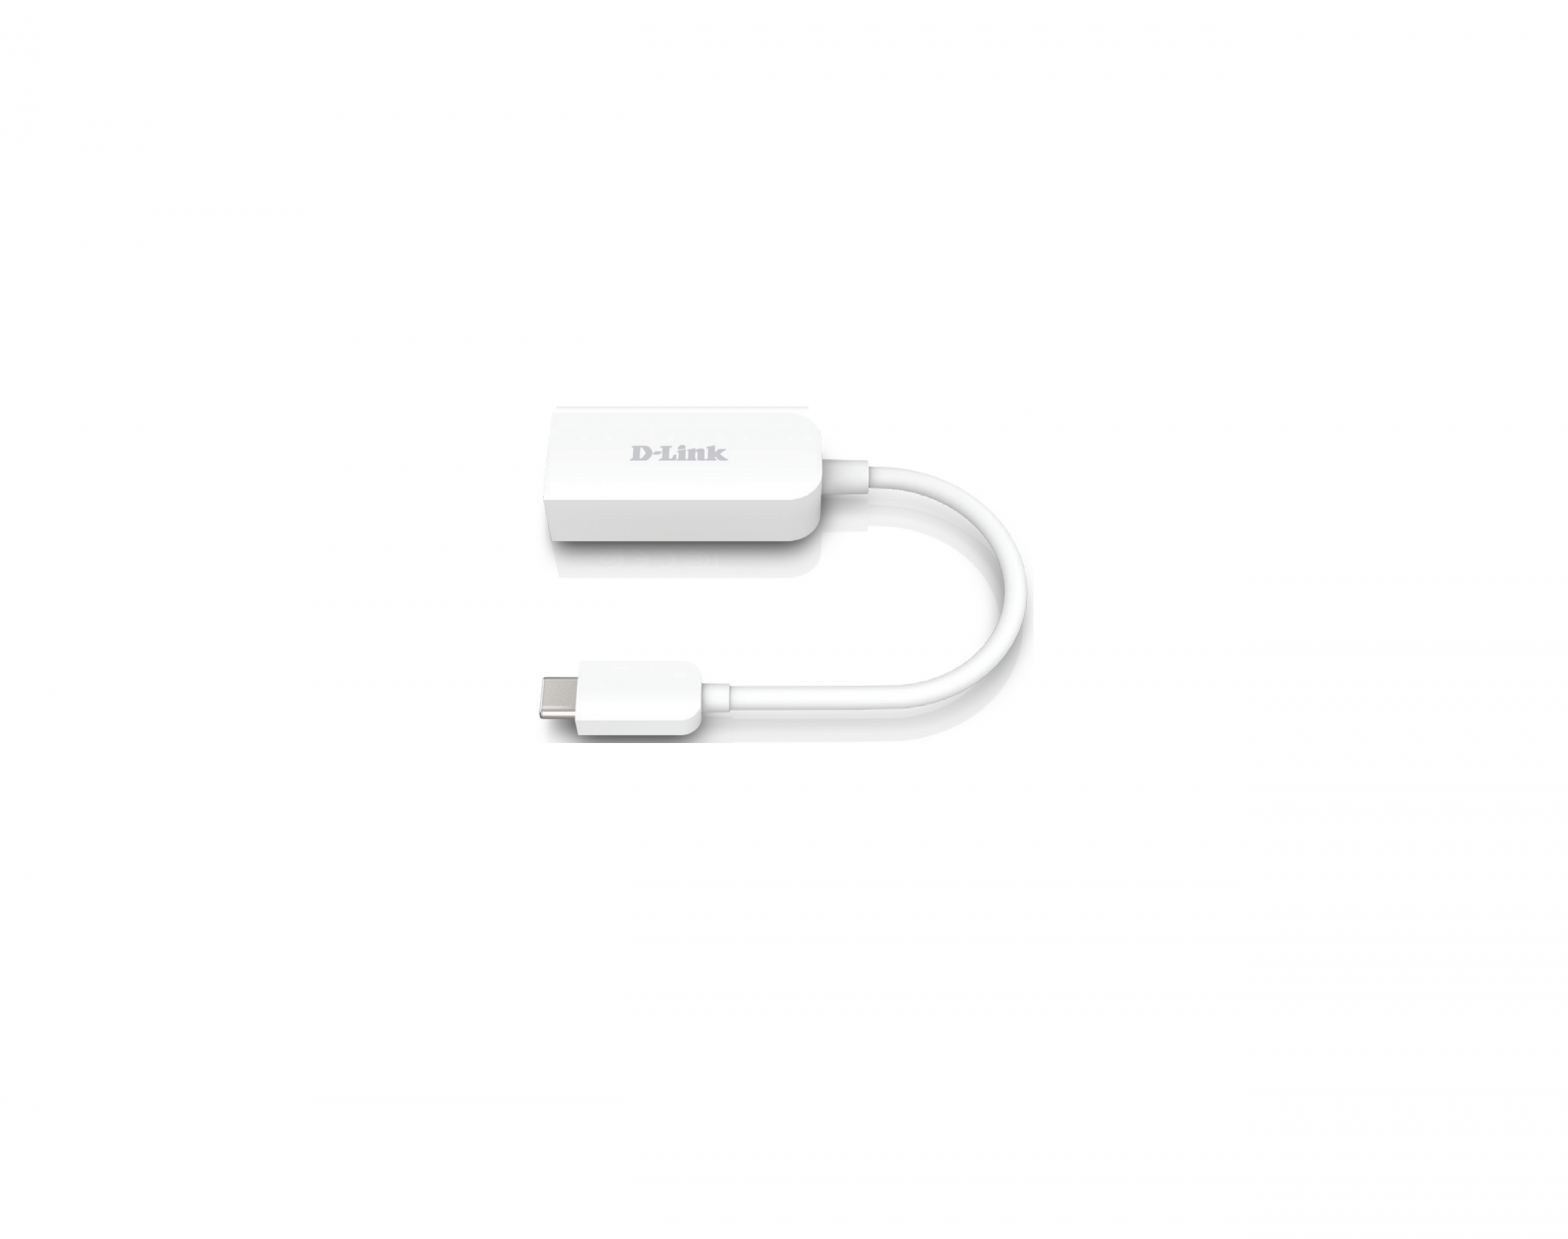 D-Link DUB-E250 USB-C to 2.5G Ethernet Adapter Installation Guide